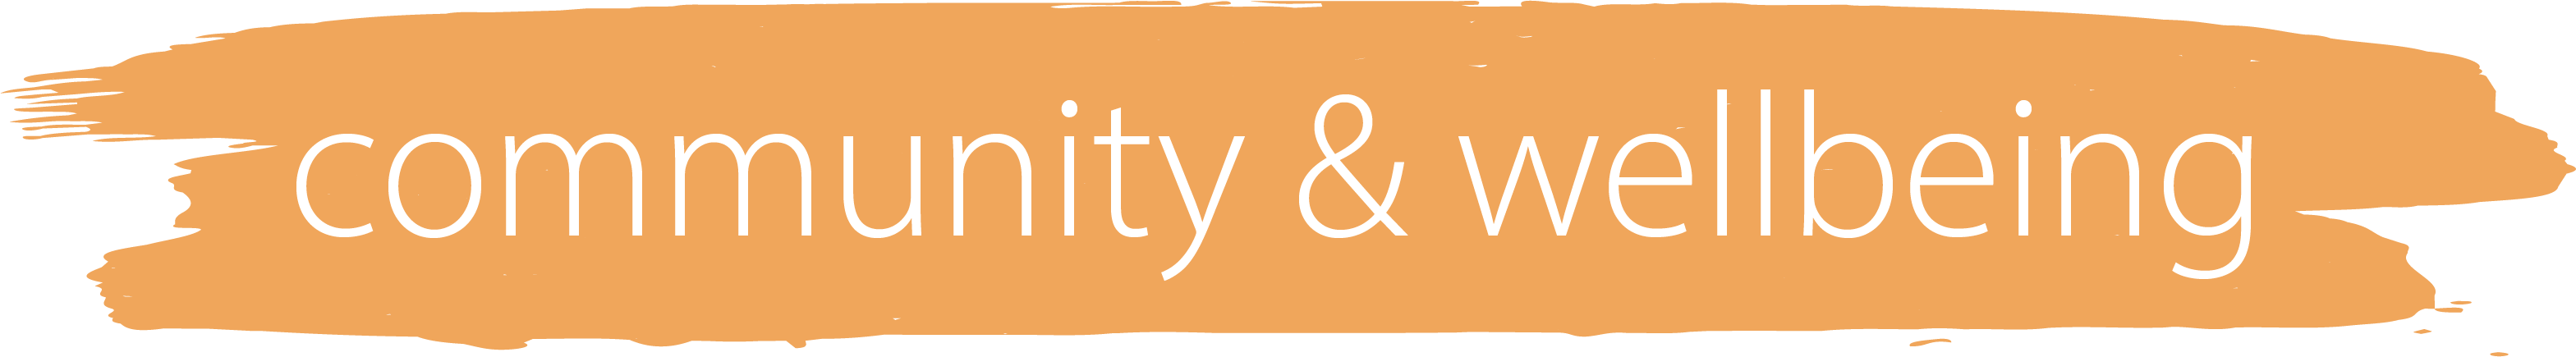 logo for community and wellbeing